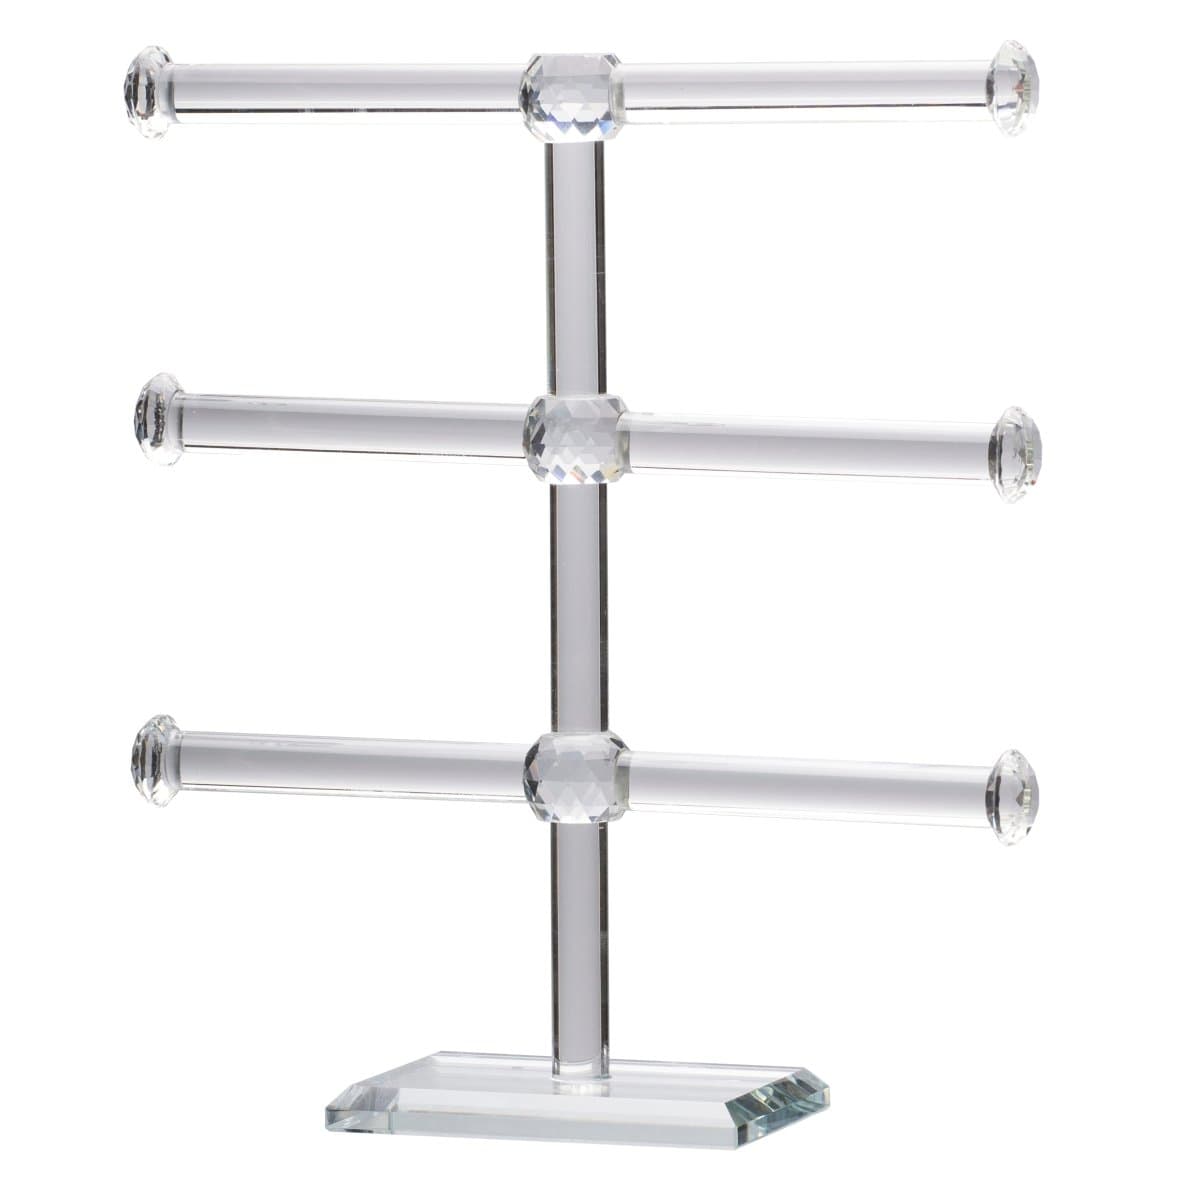 AB-76441 MAYFAIR 3-TIER GLASS JEWELRY RACK picket and rail